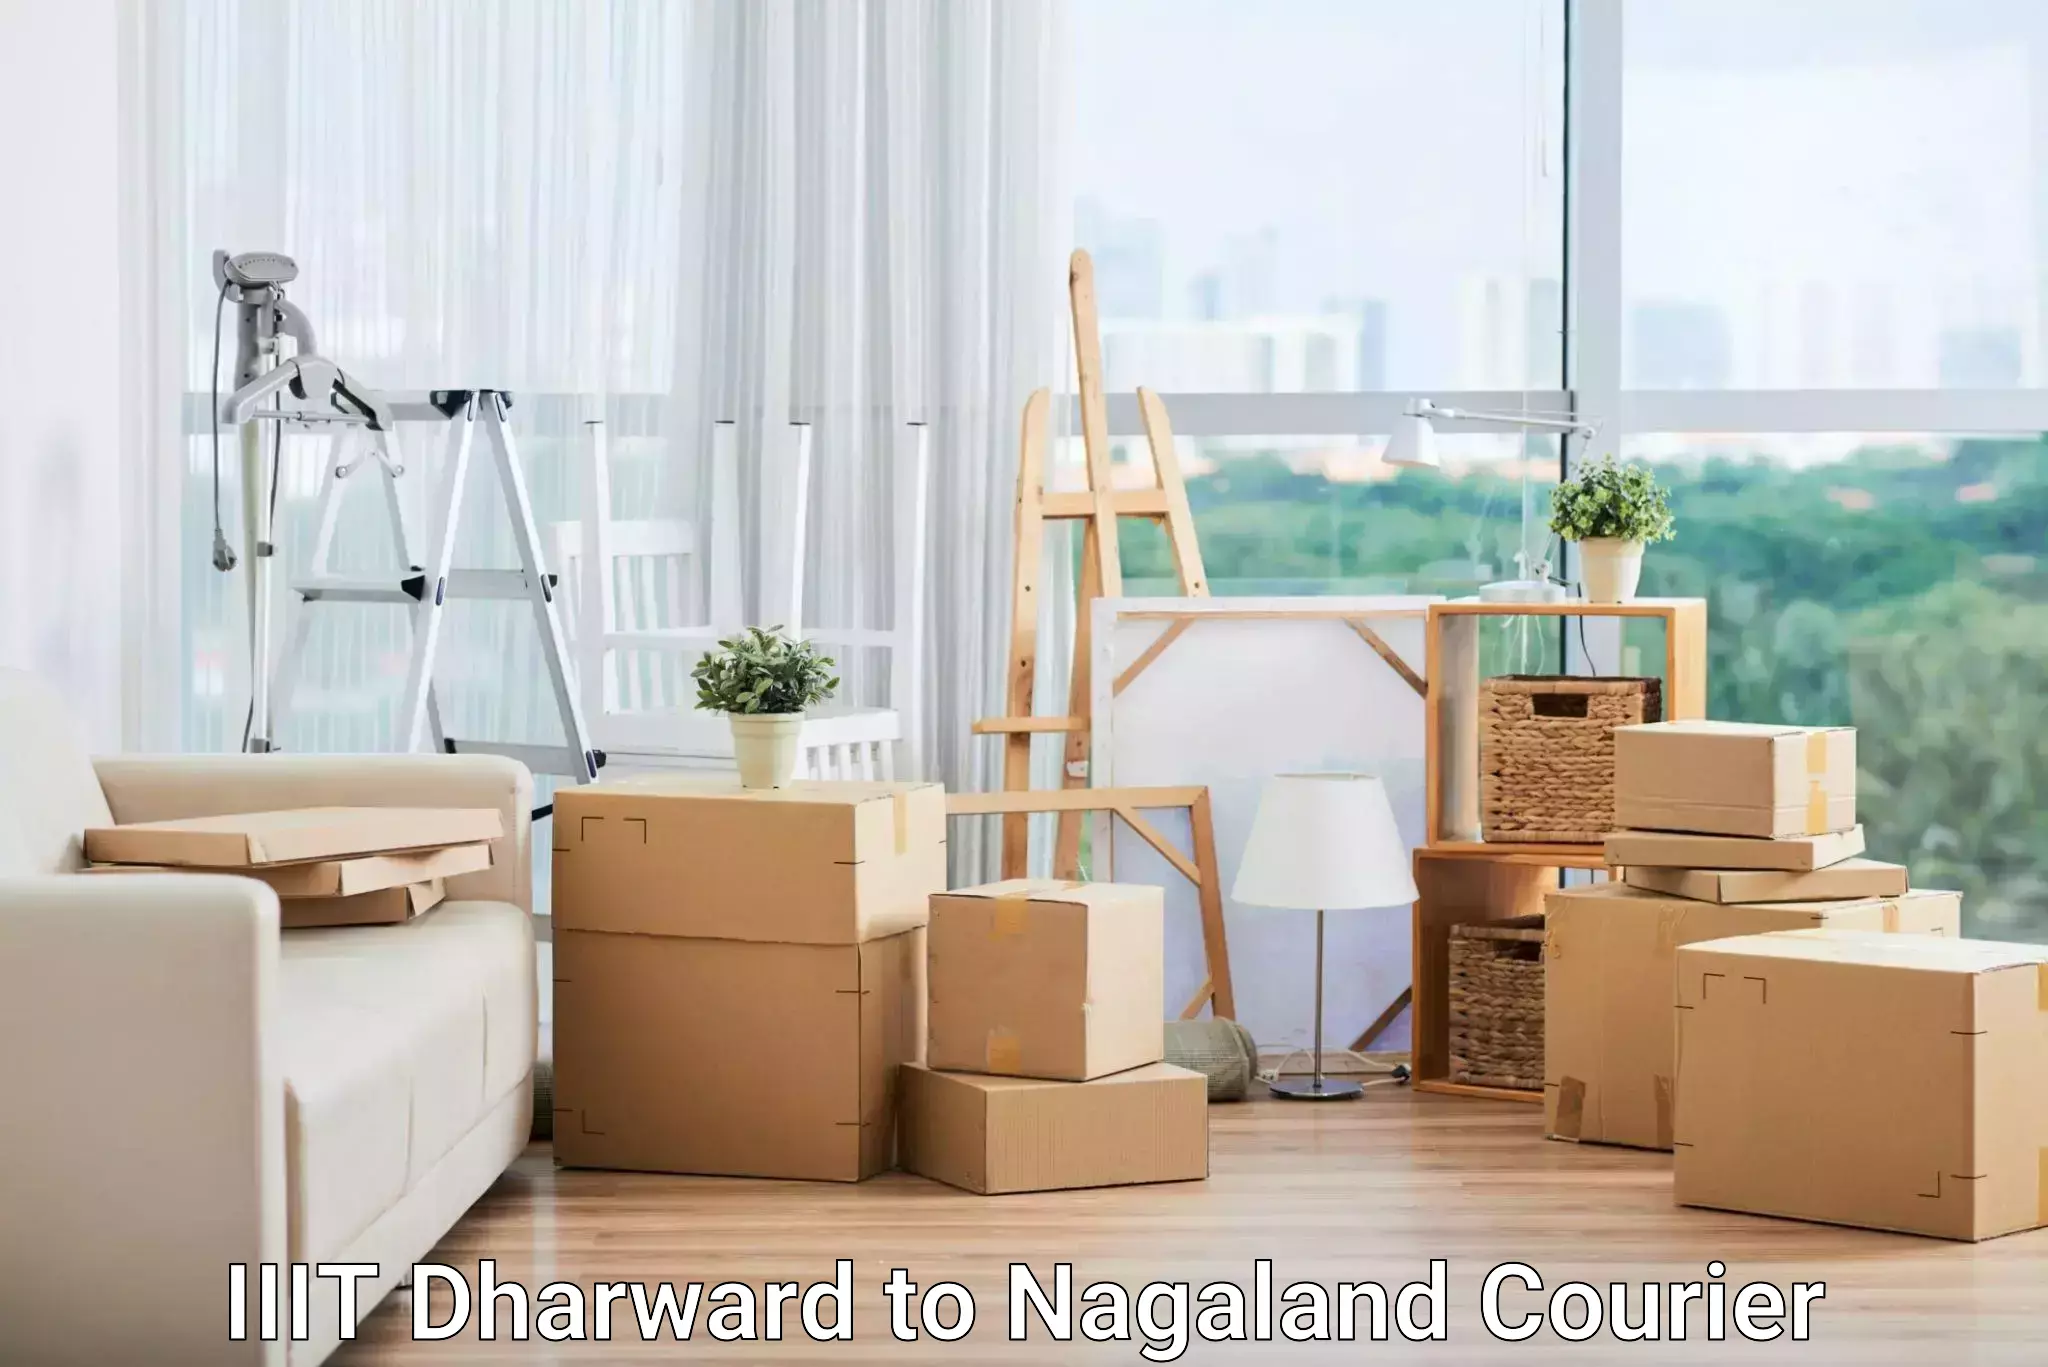 Overnight delivery services IIIT Dharward to Nagaland